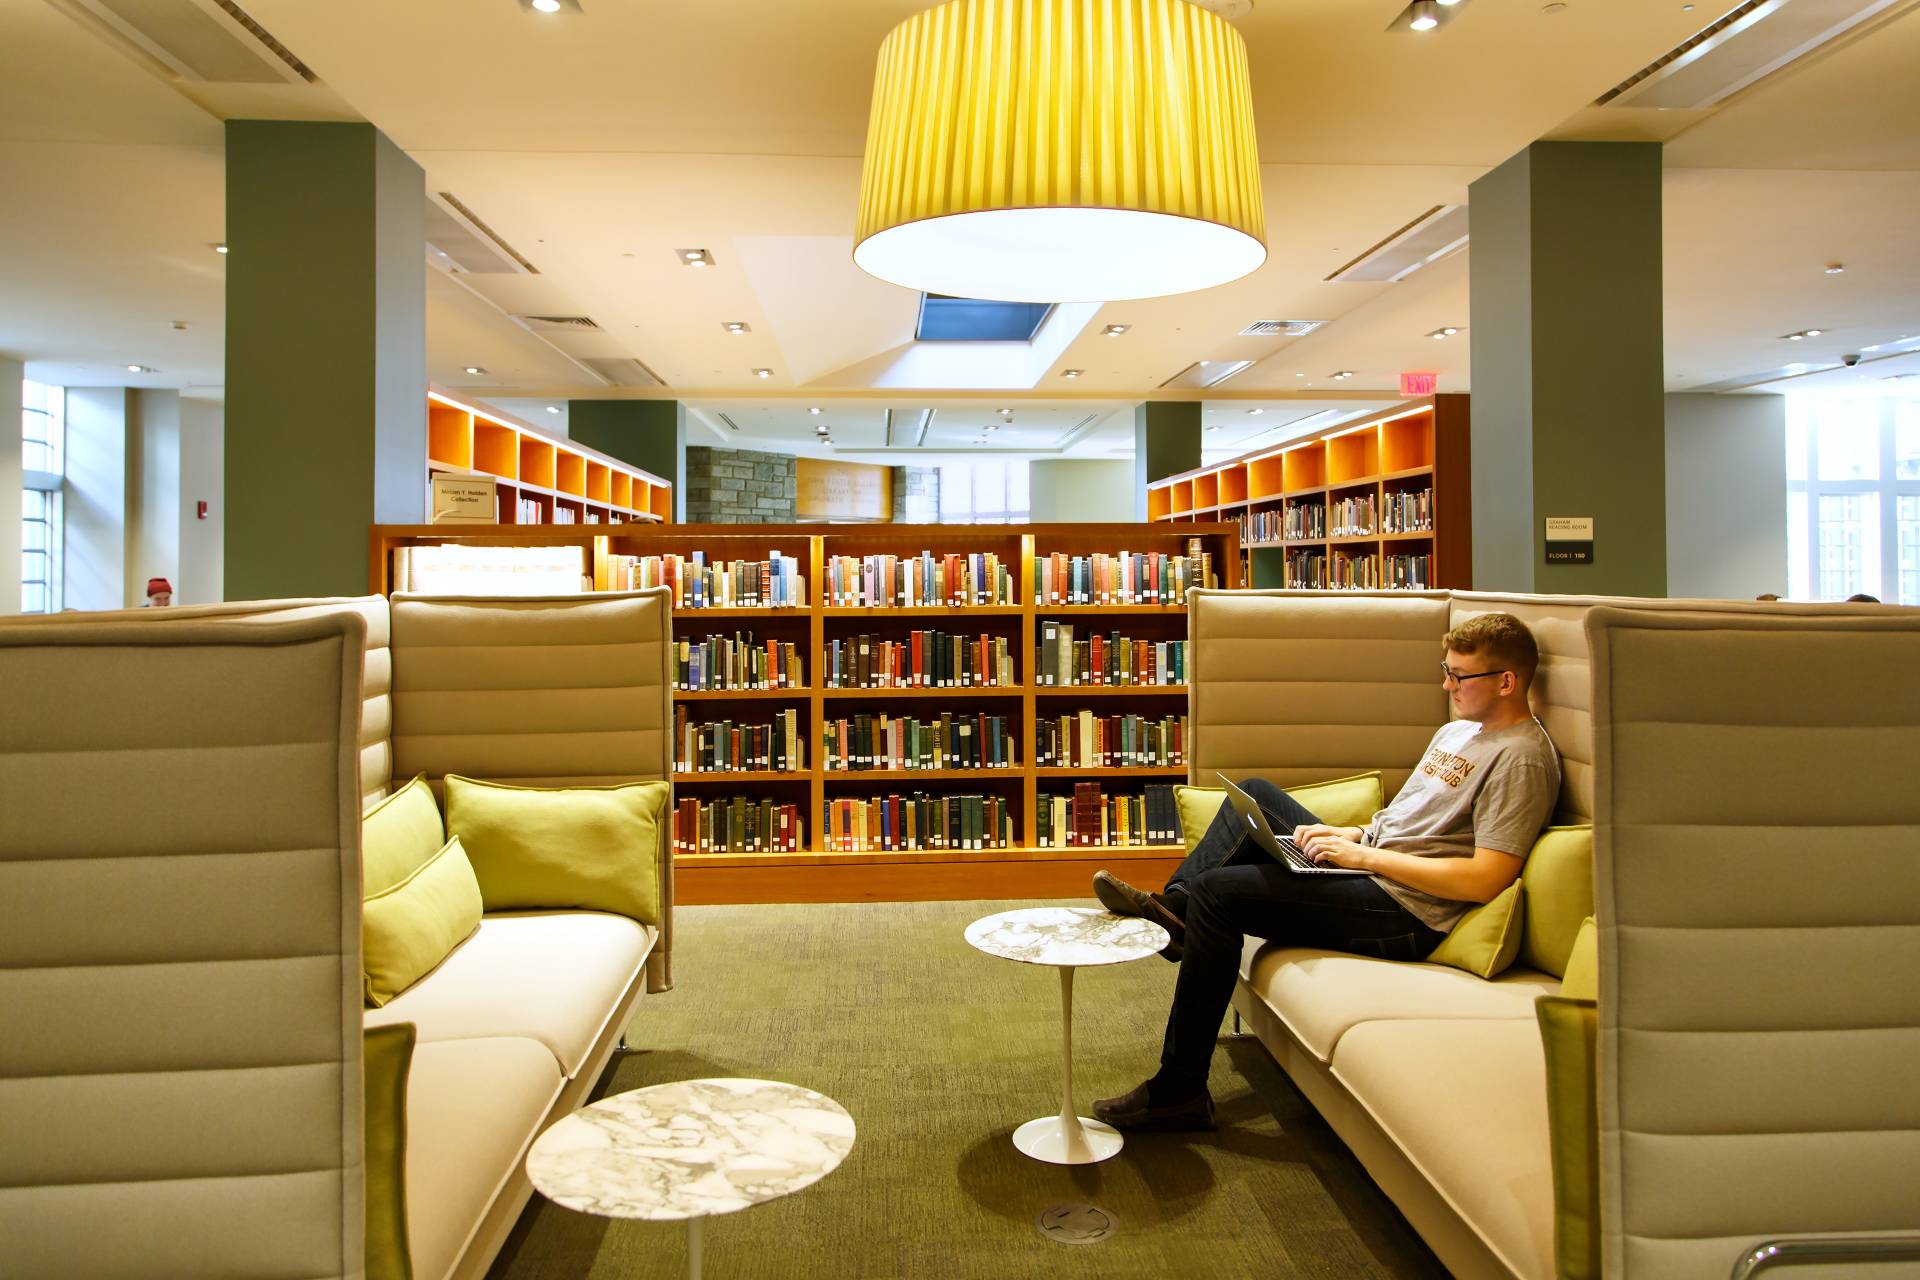 Student sitting on large green couch in library room